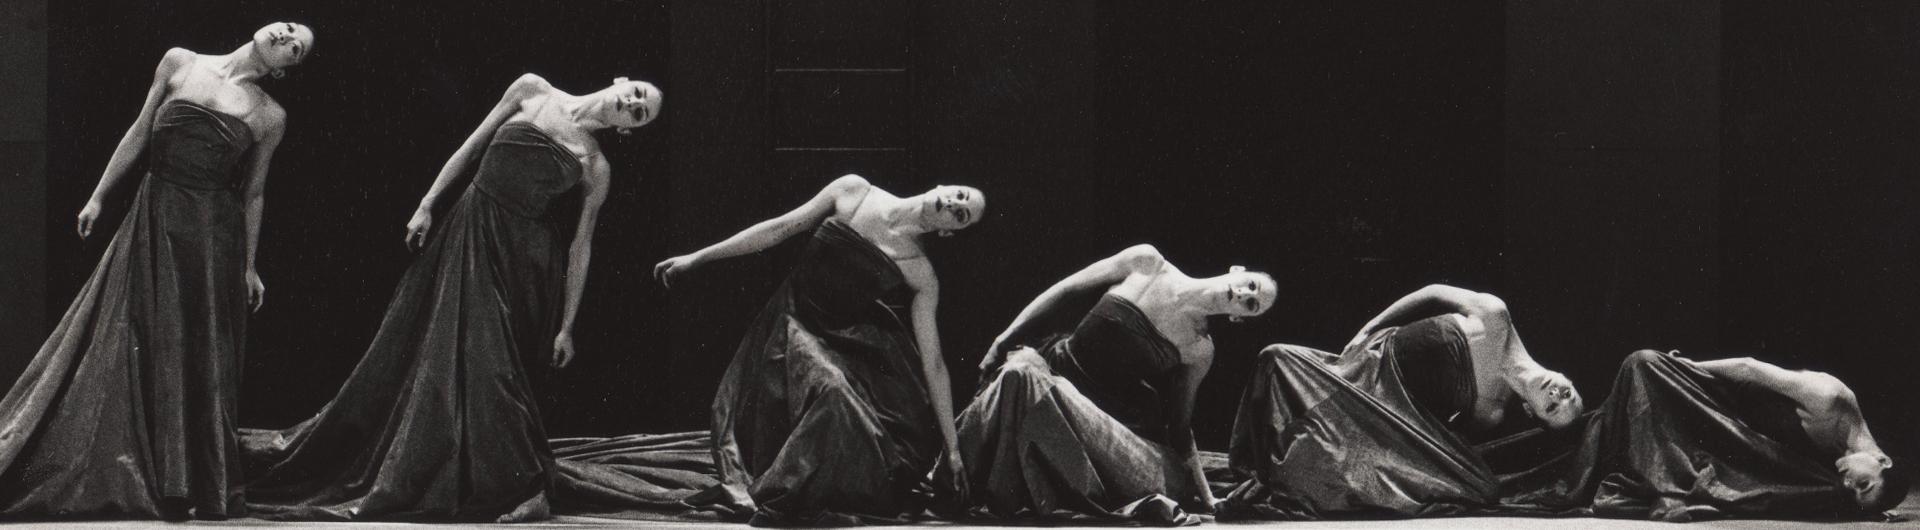 Five dancers lowering to the floor from "Odysee"